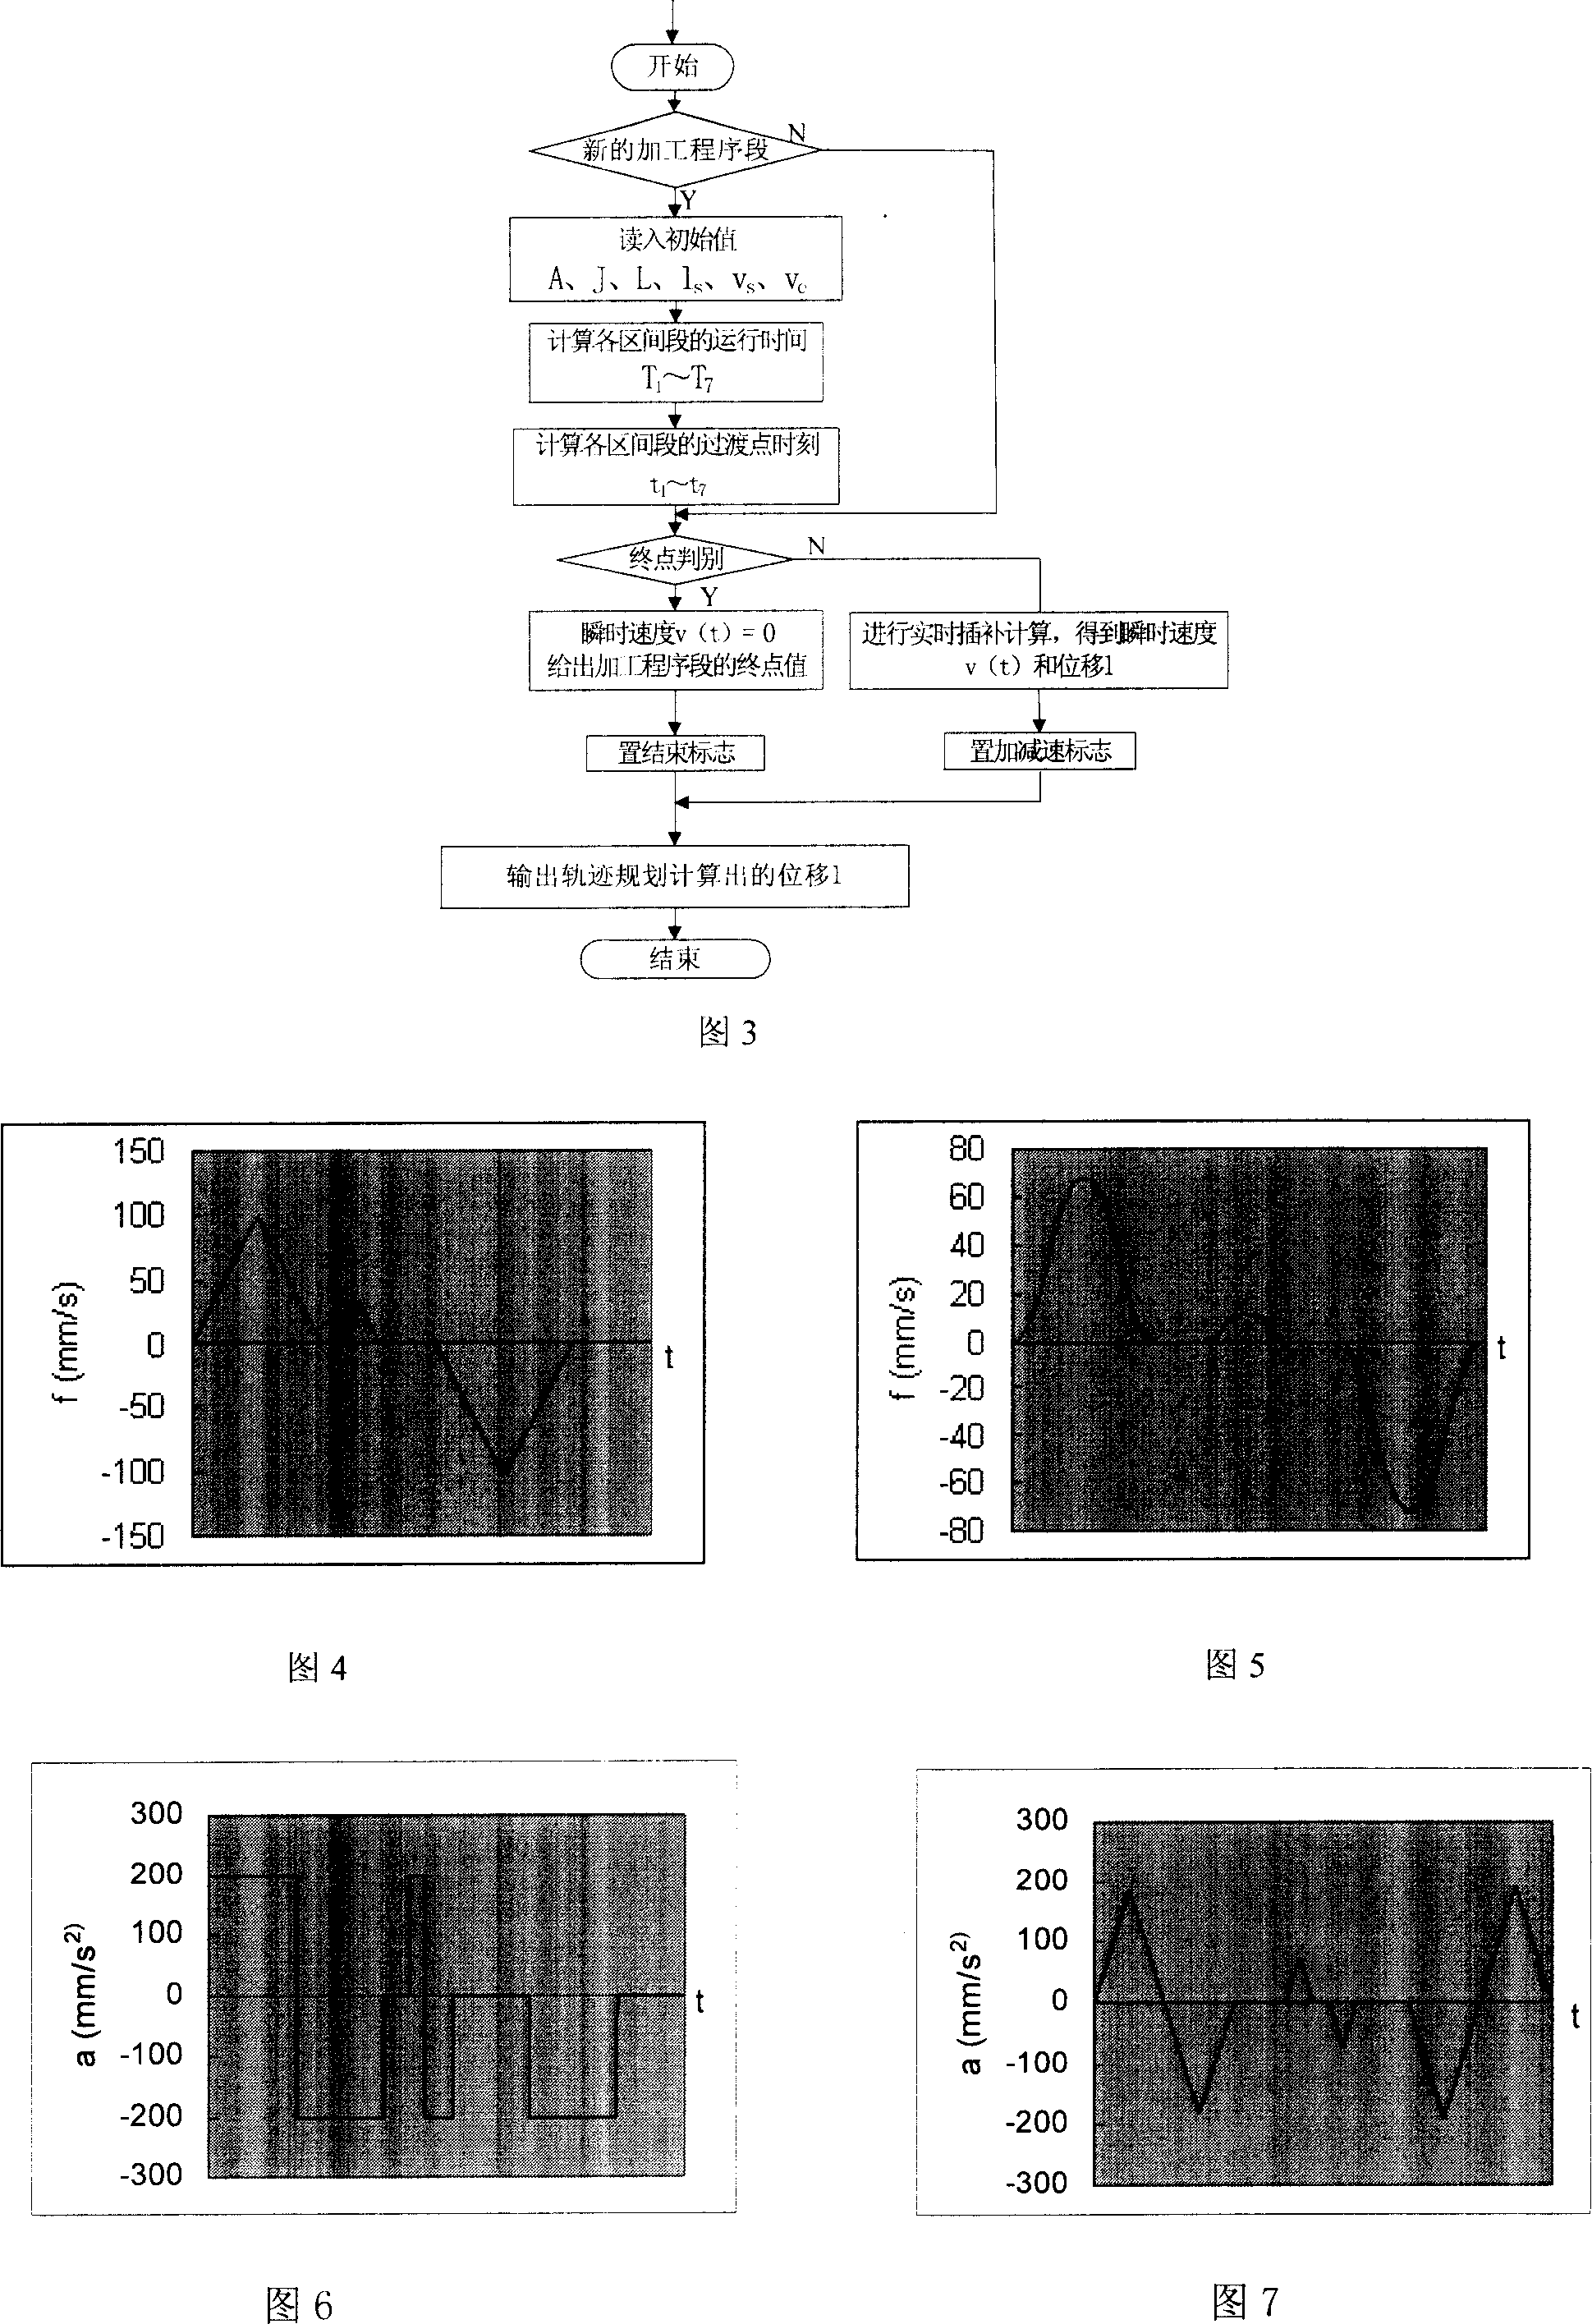 Speed control method used for numerical control machine